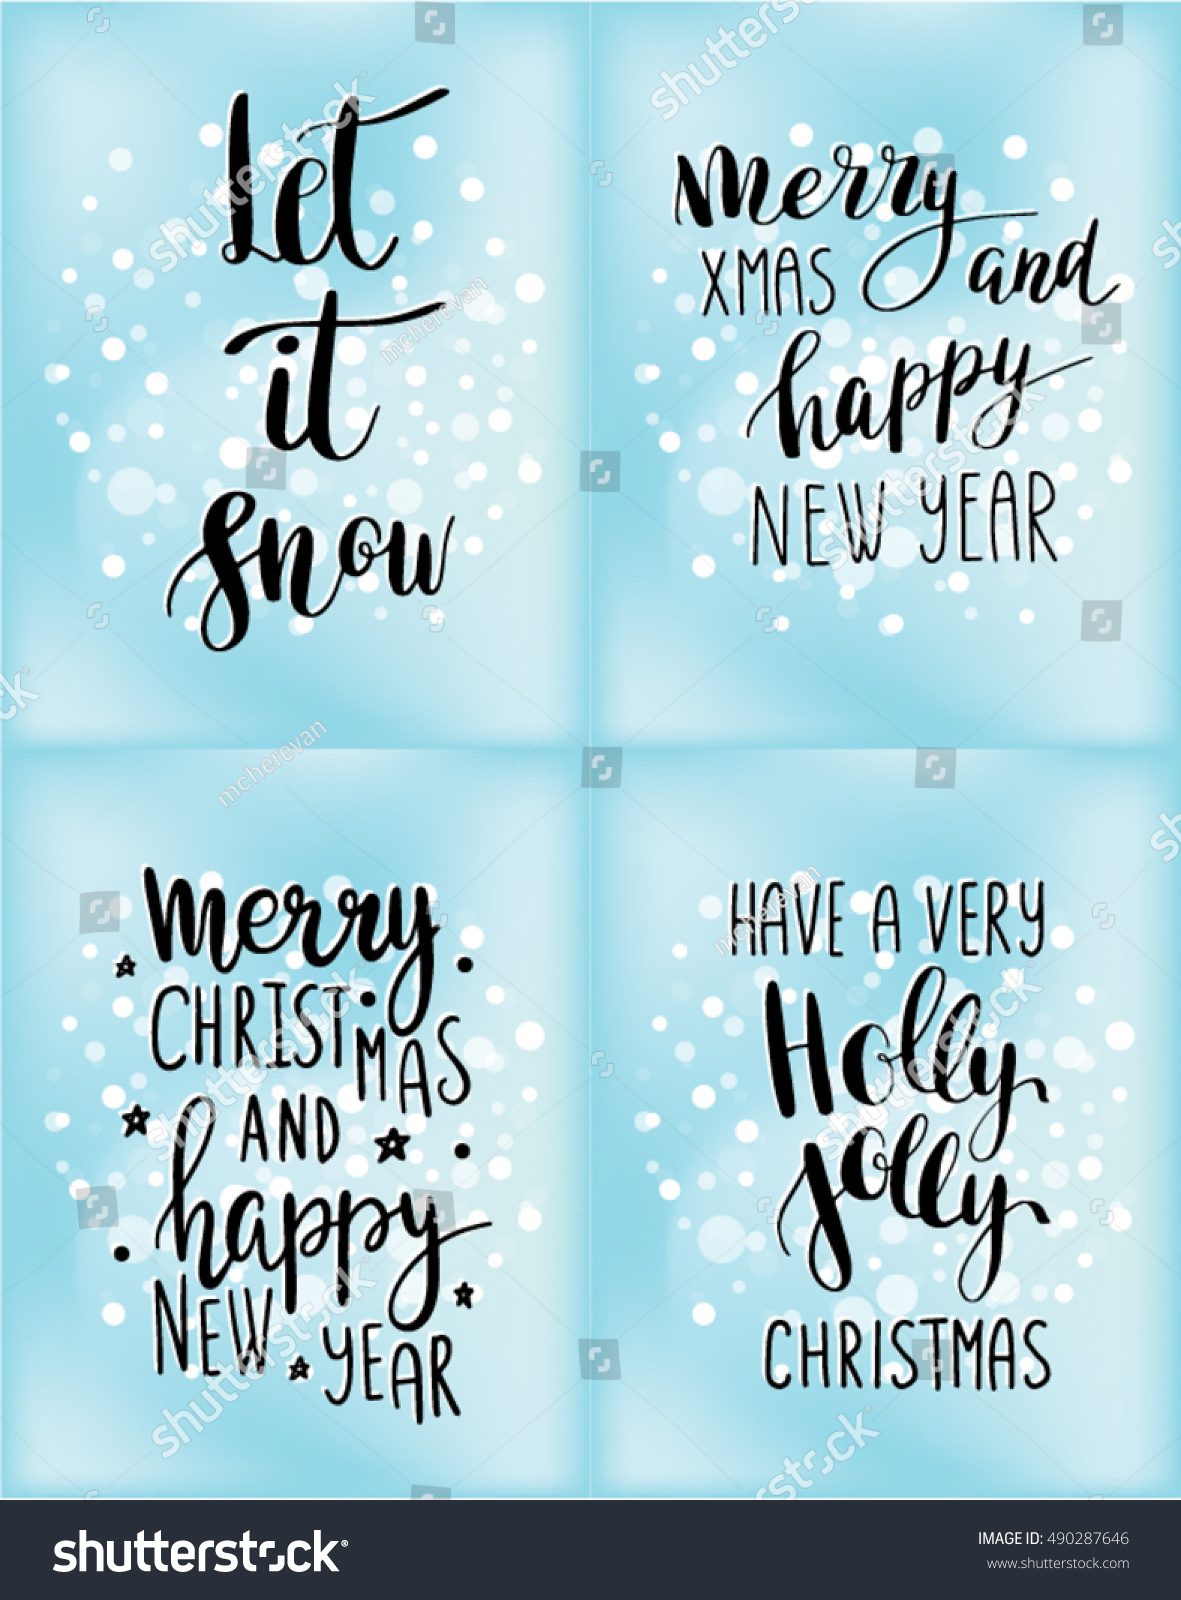 Christmas Greetings Quotes Images